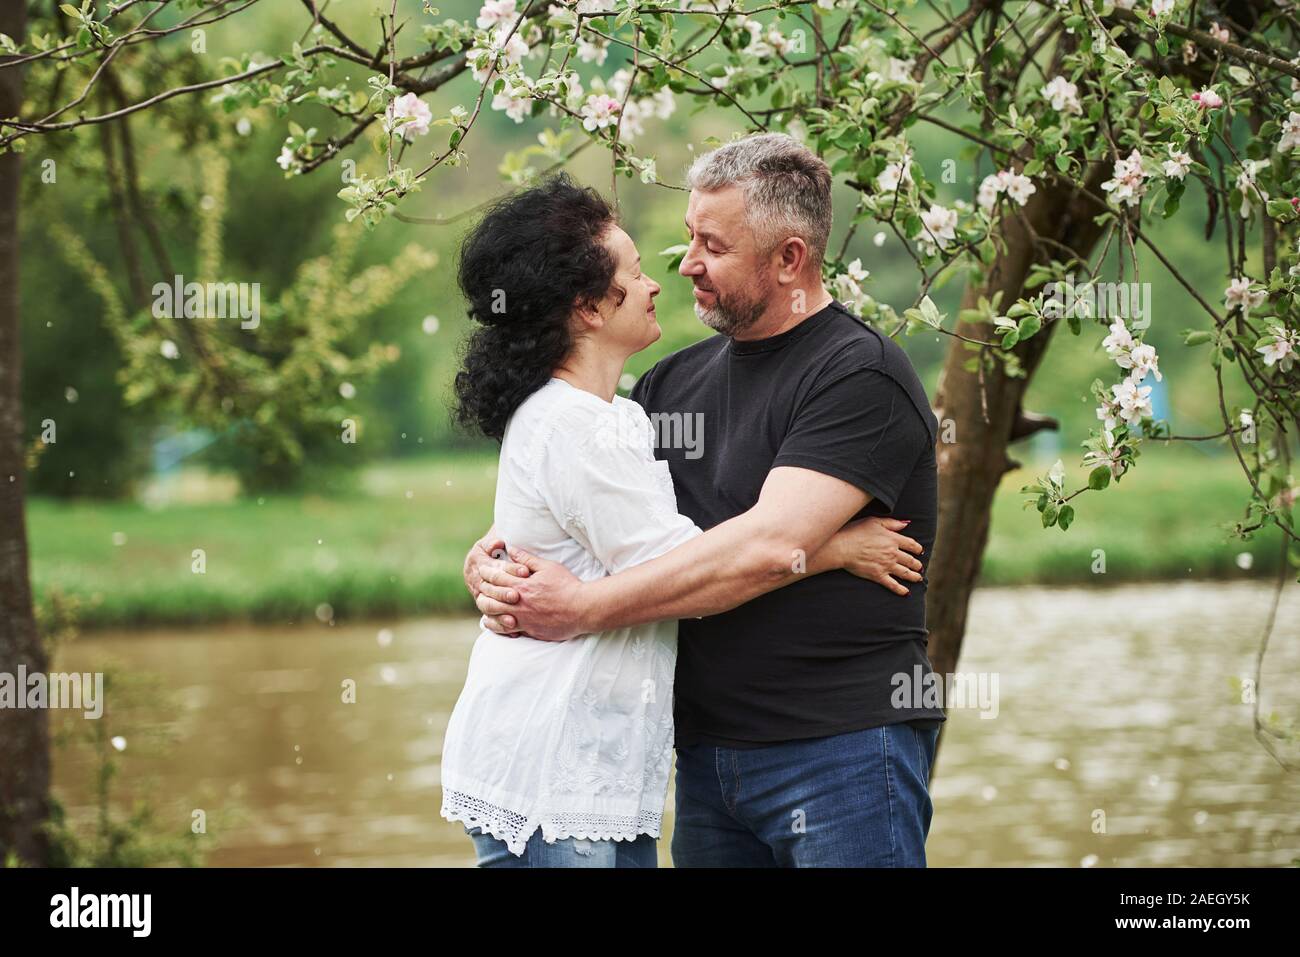 Looking at each other with love. Cheerful couple enjoying nice weekend outdoors. Good spring weather Stock Photo